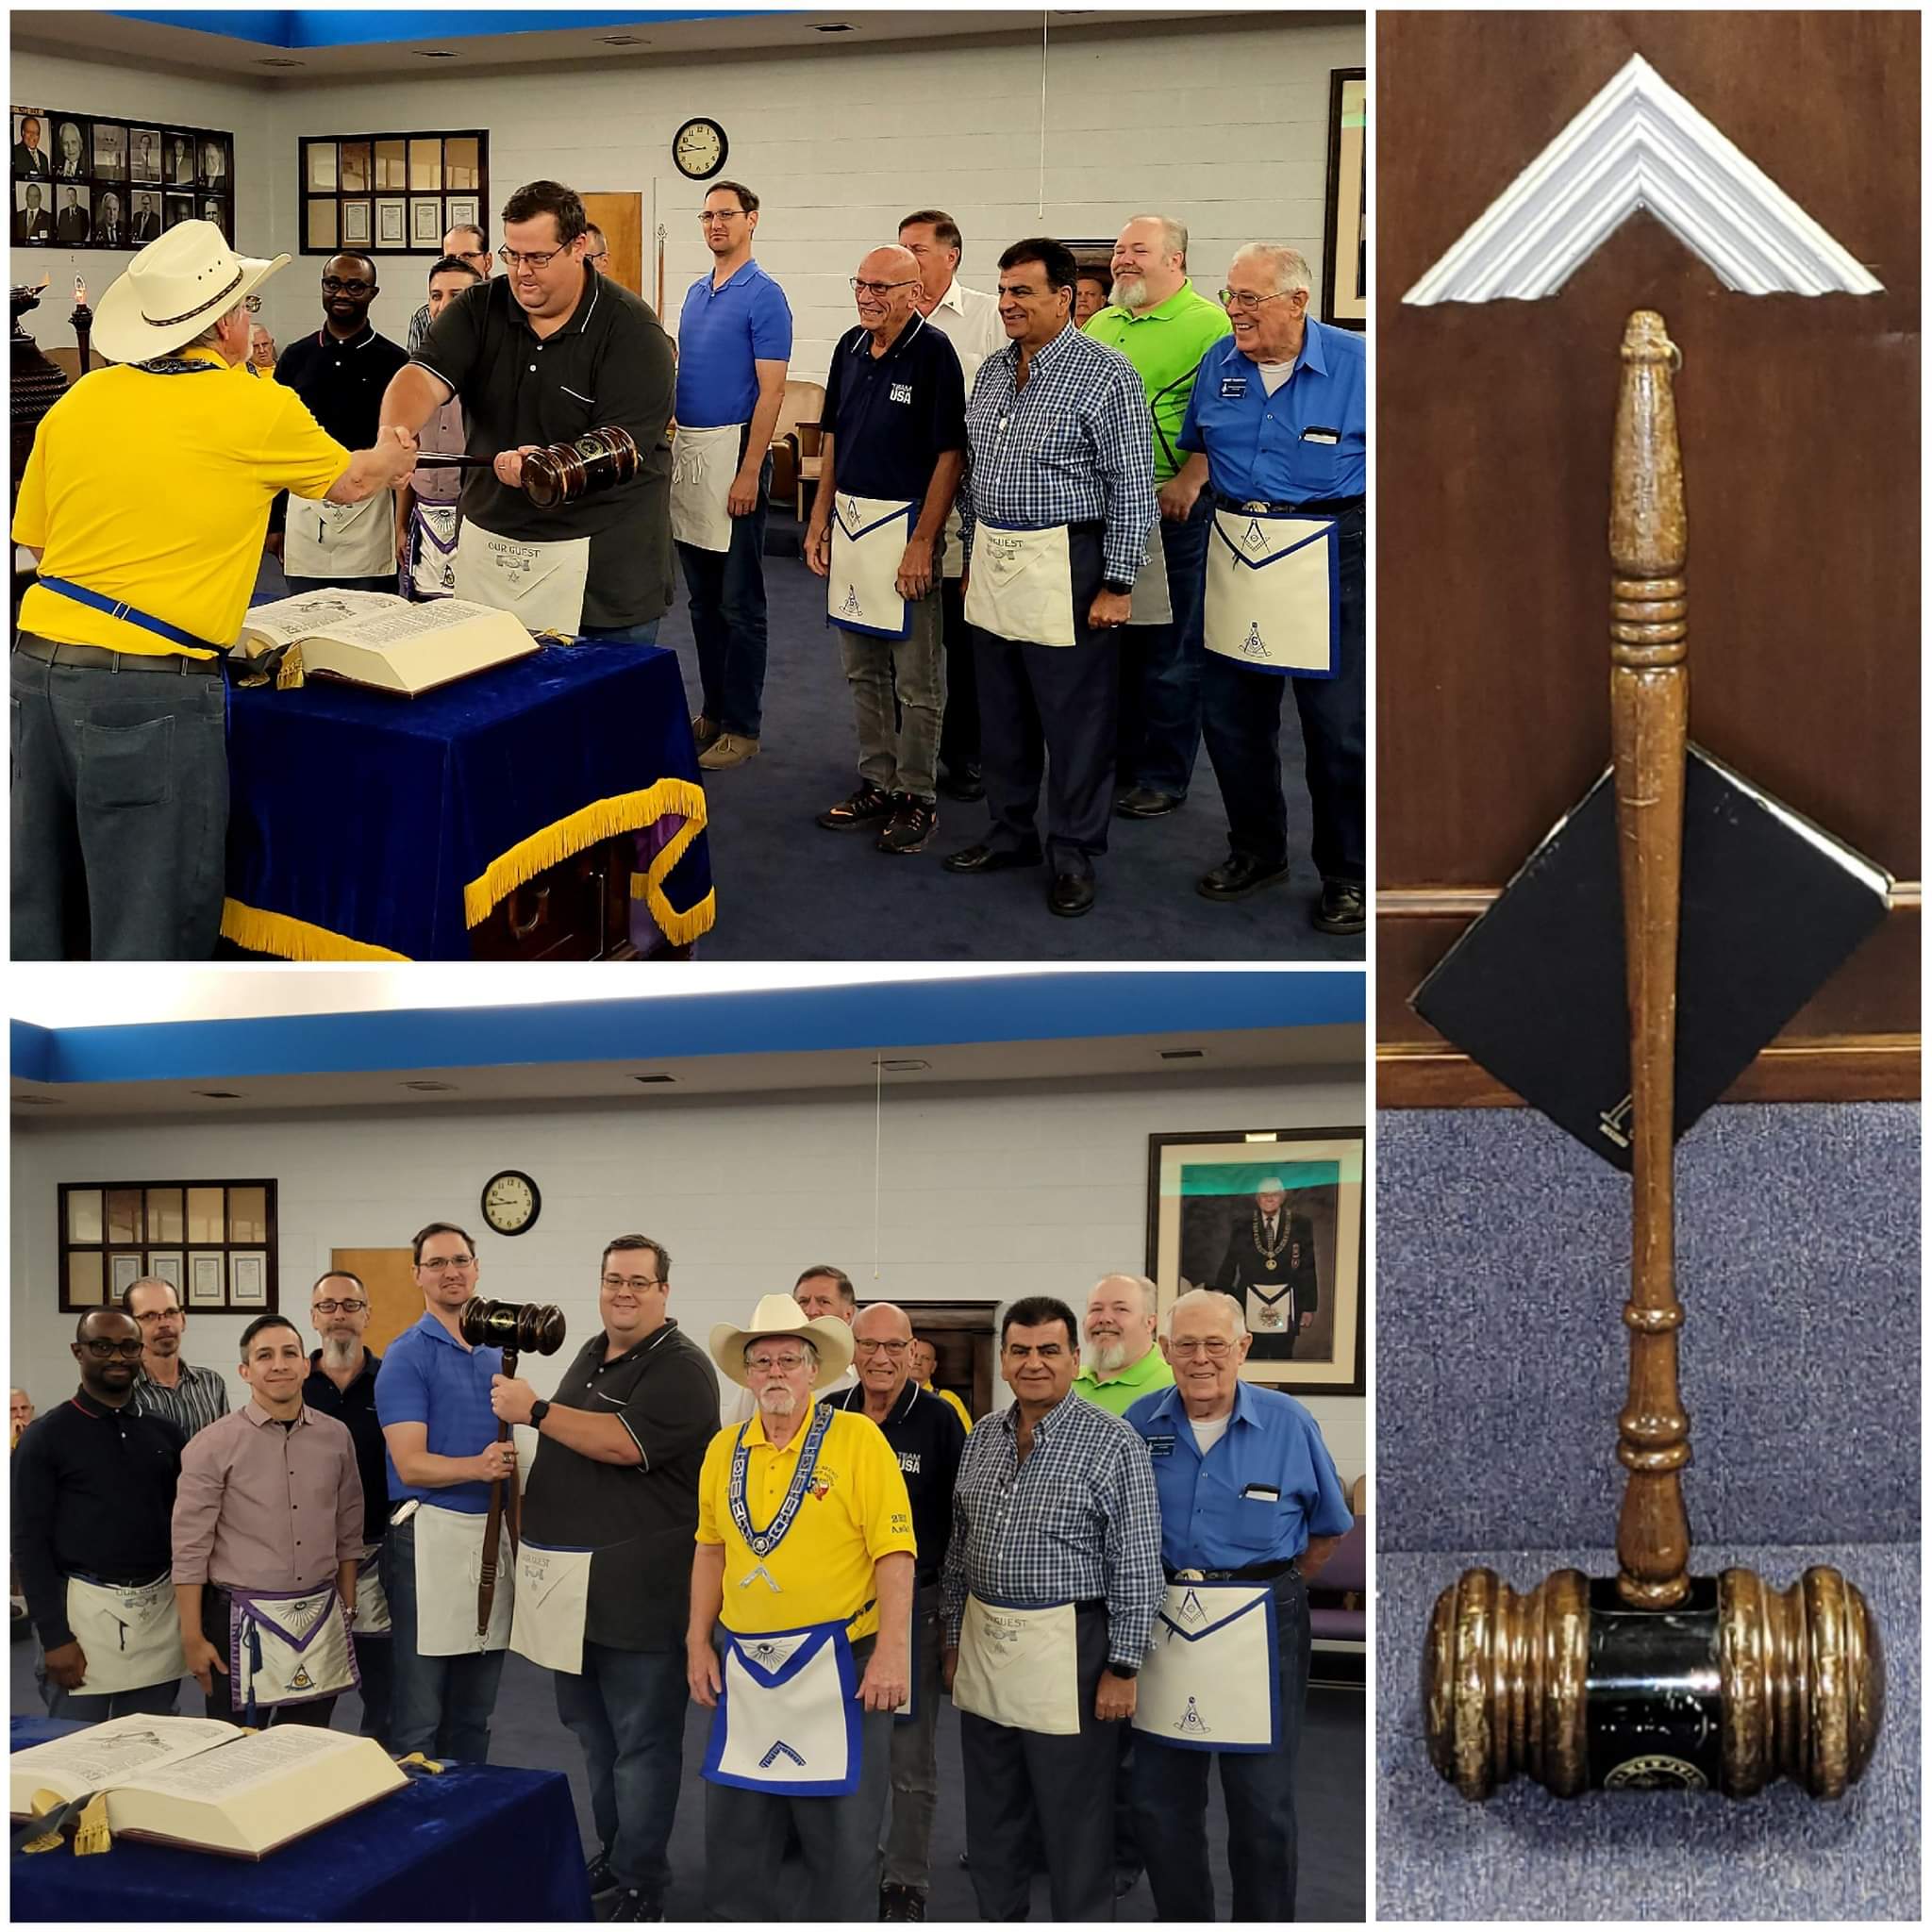 Carrollton captures the Traveling Gavel from Sunshine Lodge #341